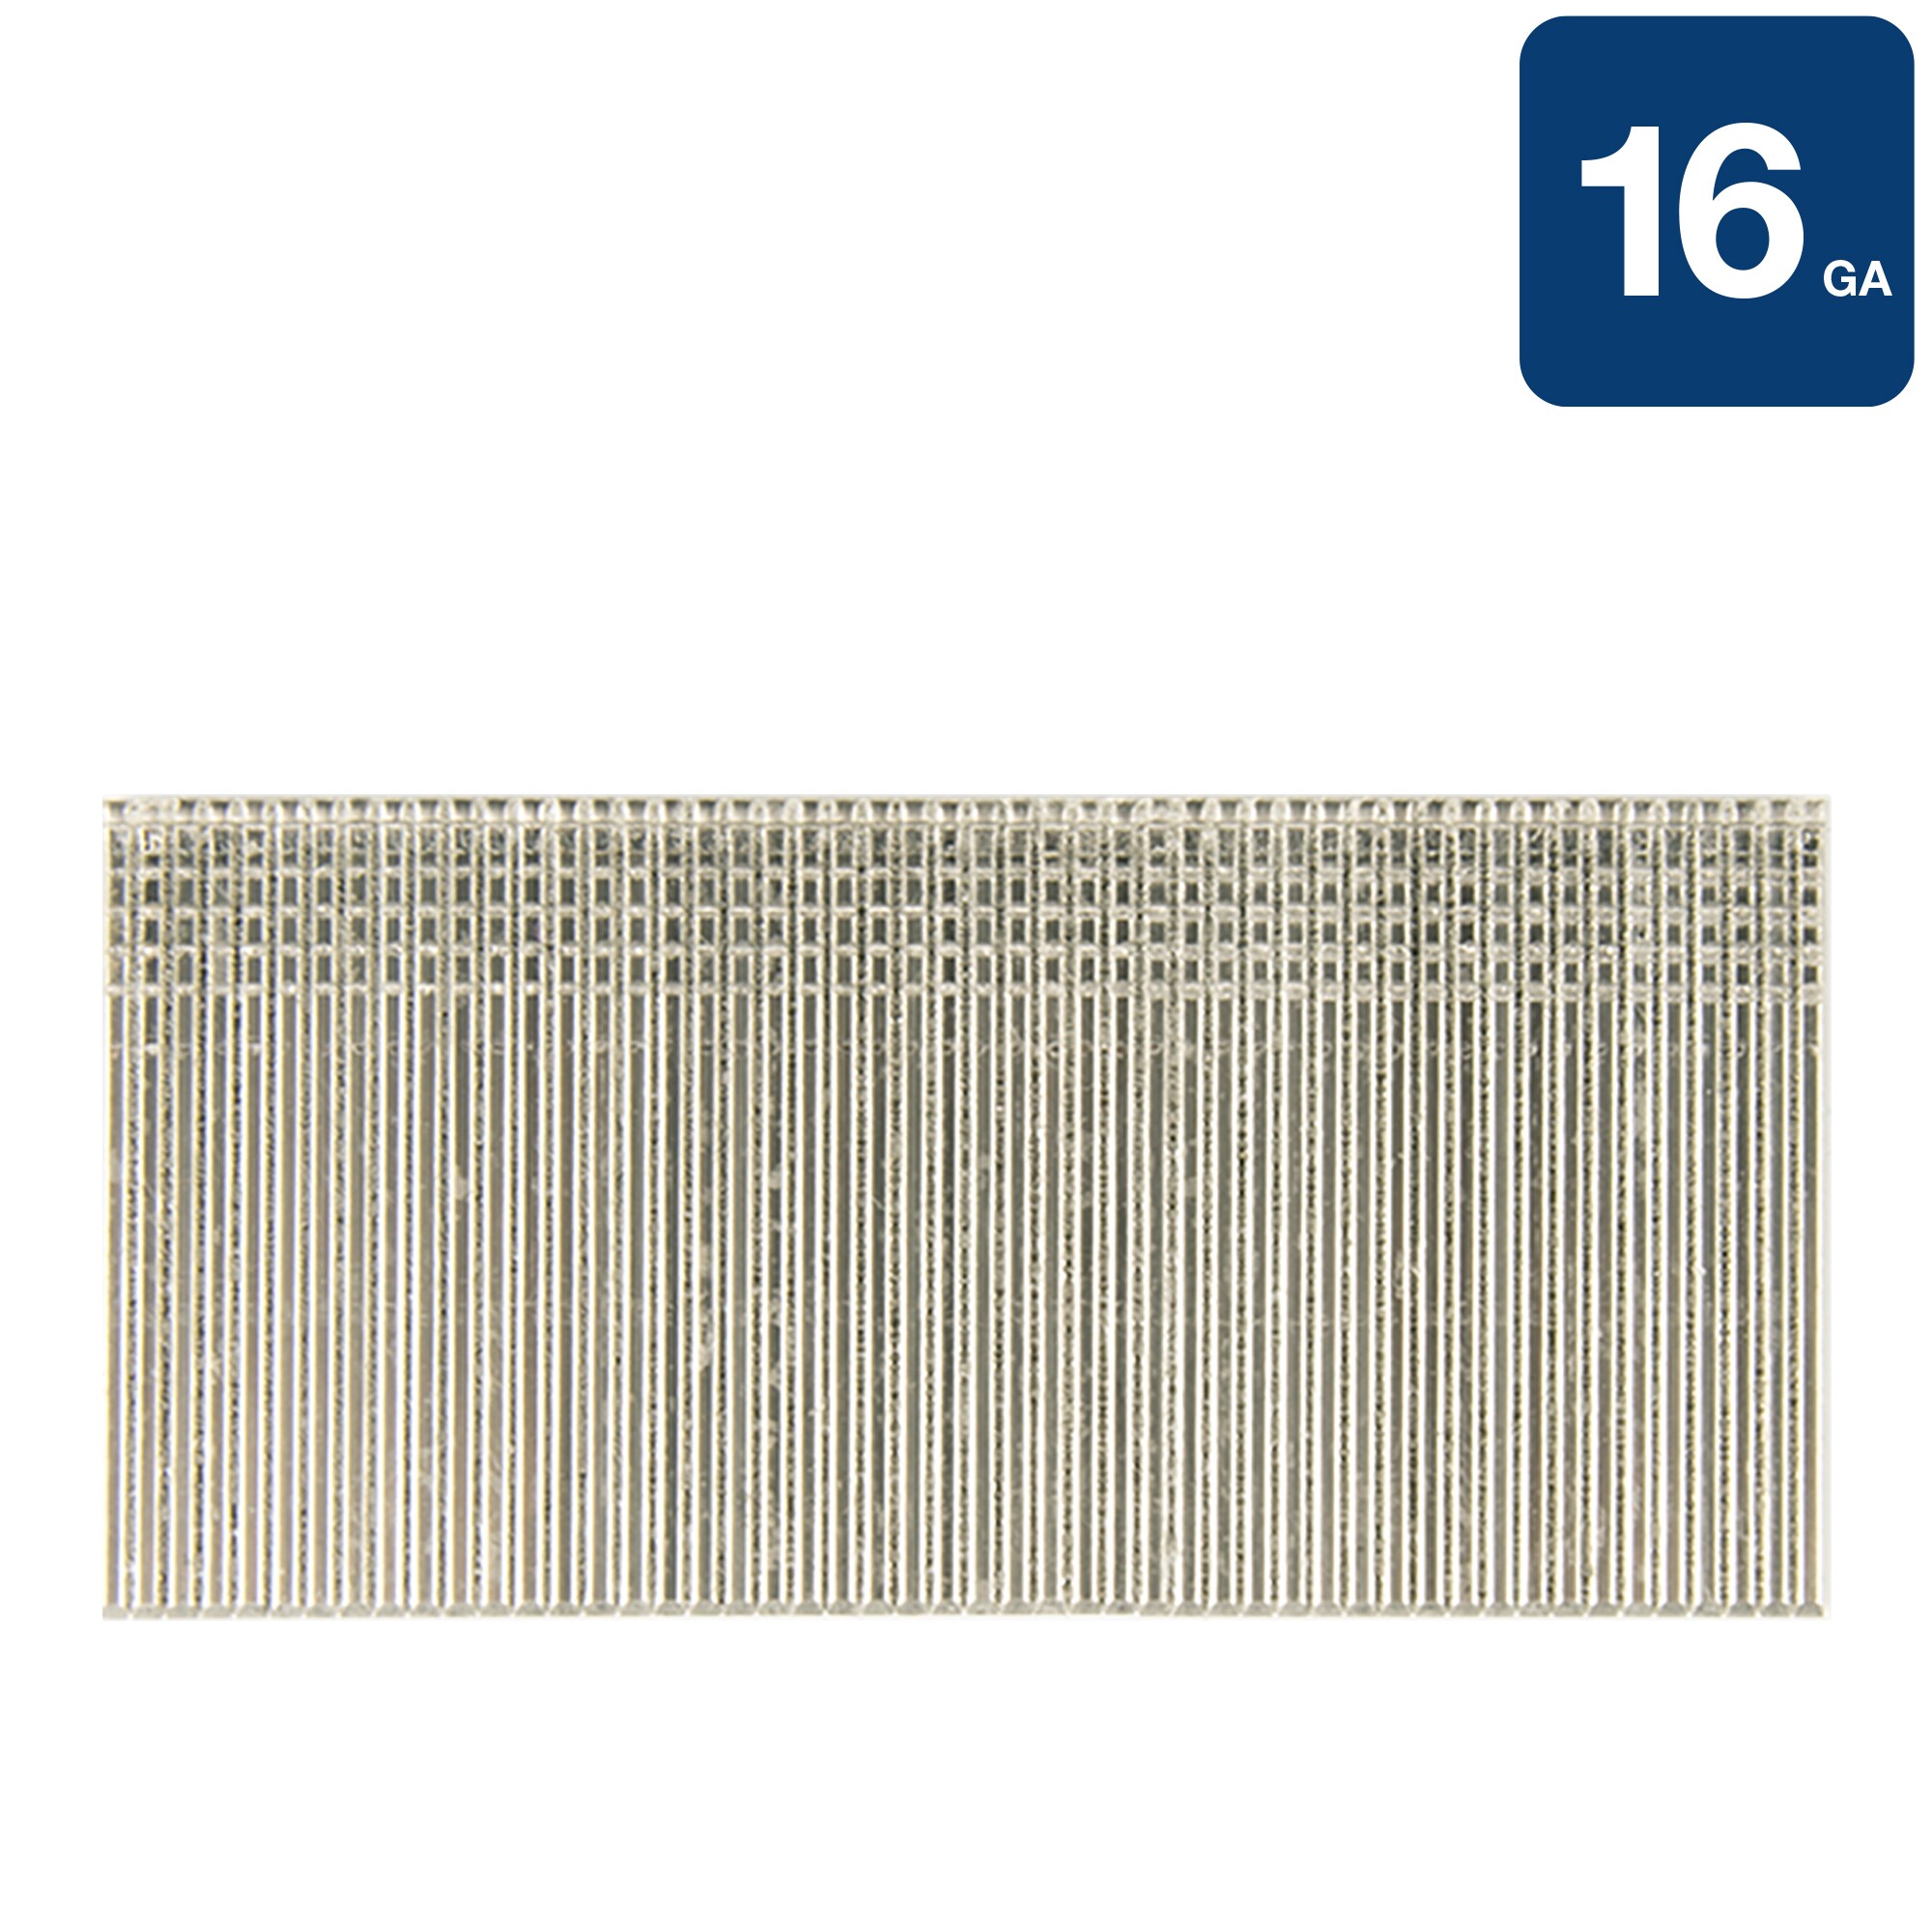 National Nail 0712454 Pro Fit Straight Finish Nails 1-3/4 Inch By 16 Gauge  Electro Galvanized Smooth Shank Brad Head 1000 Pack: Pneumatic Stick Brads  (042928127131-1)